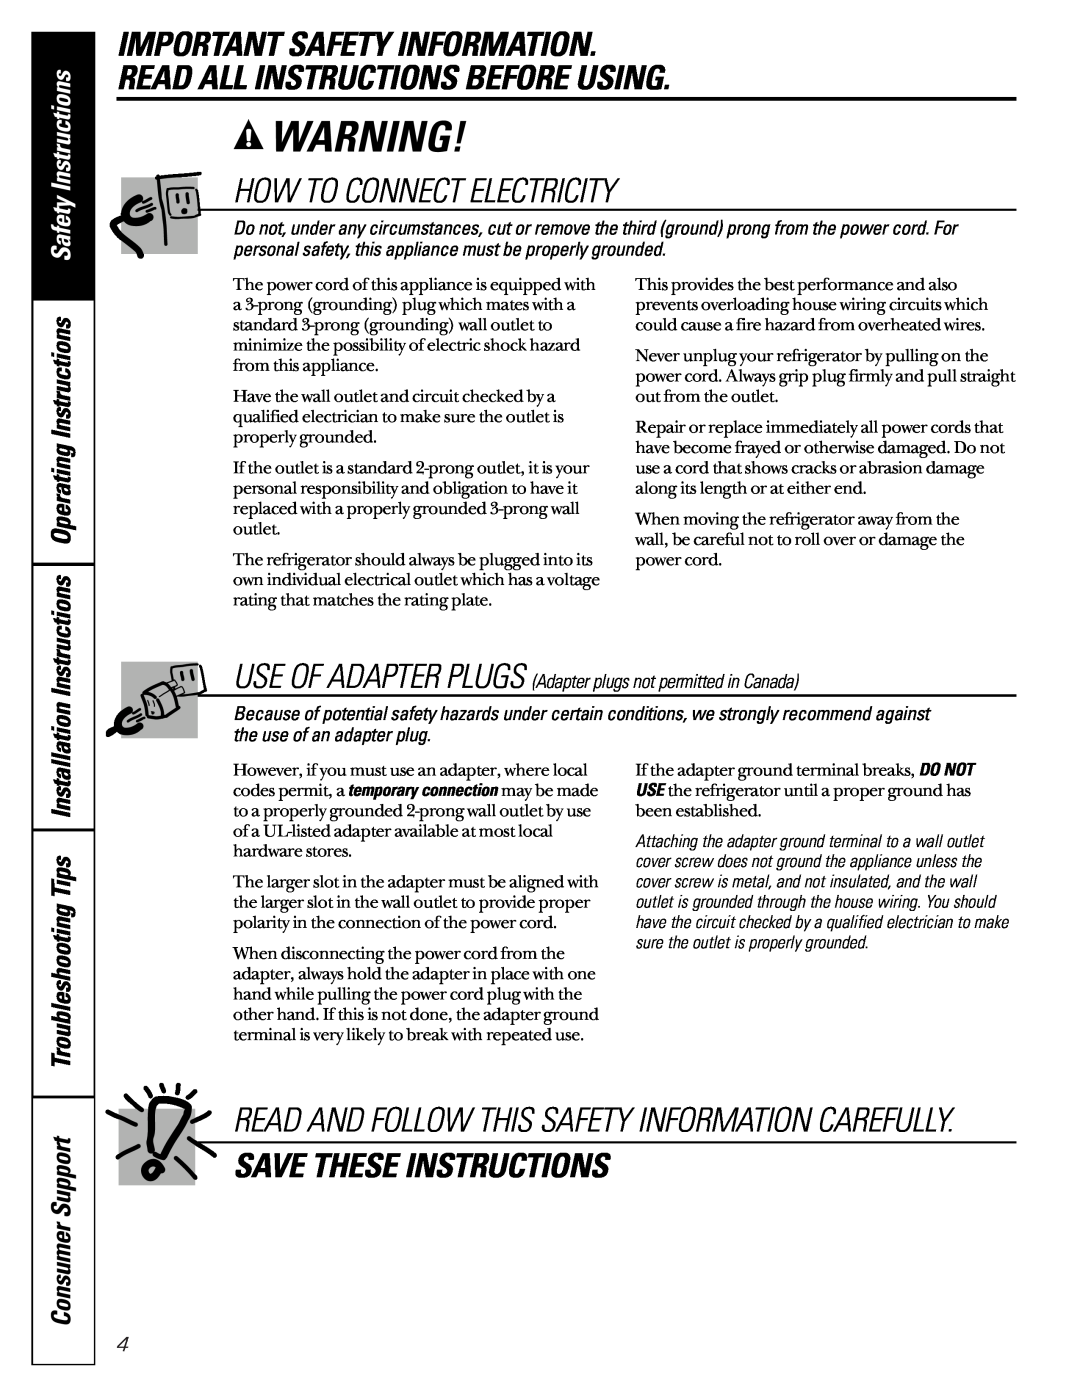 GE 200D2600P001 How To Connect Electricity, Save These Instructions, Consumer Support, Instructions Operating Instructions 